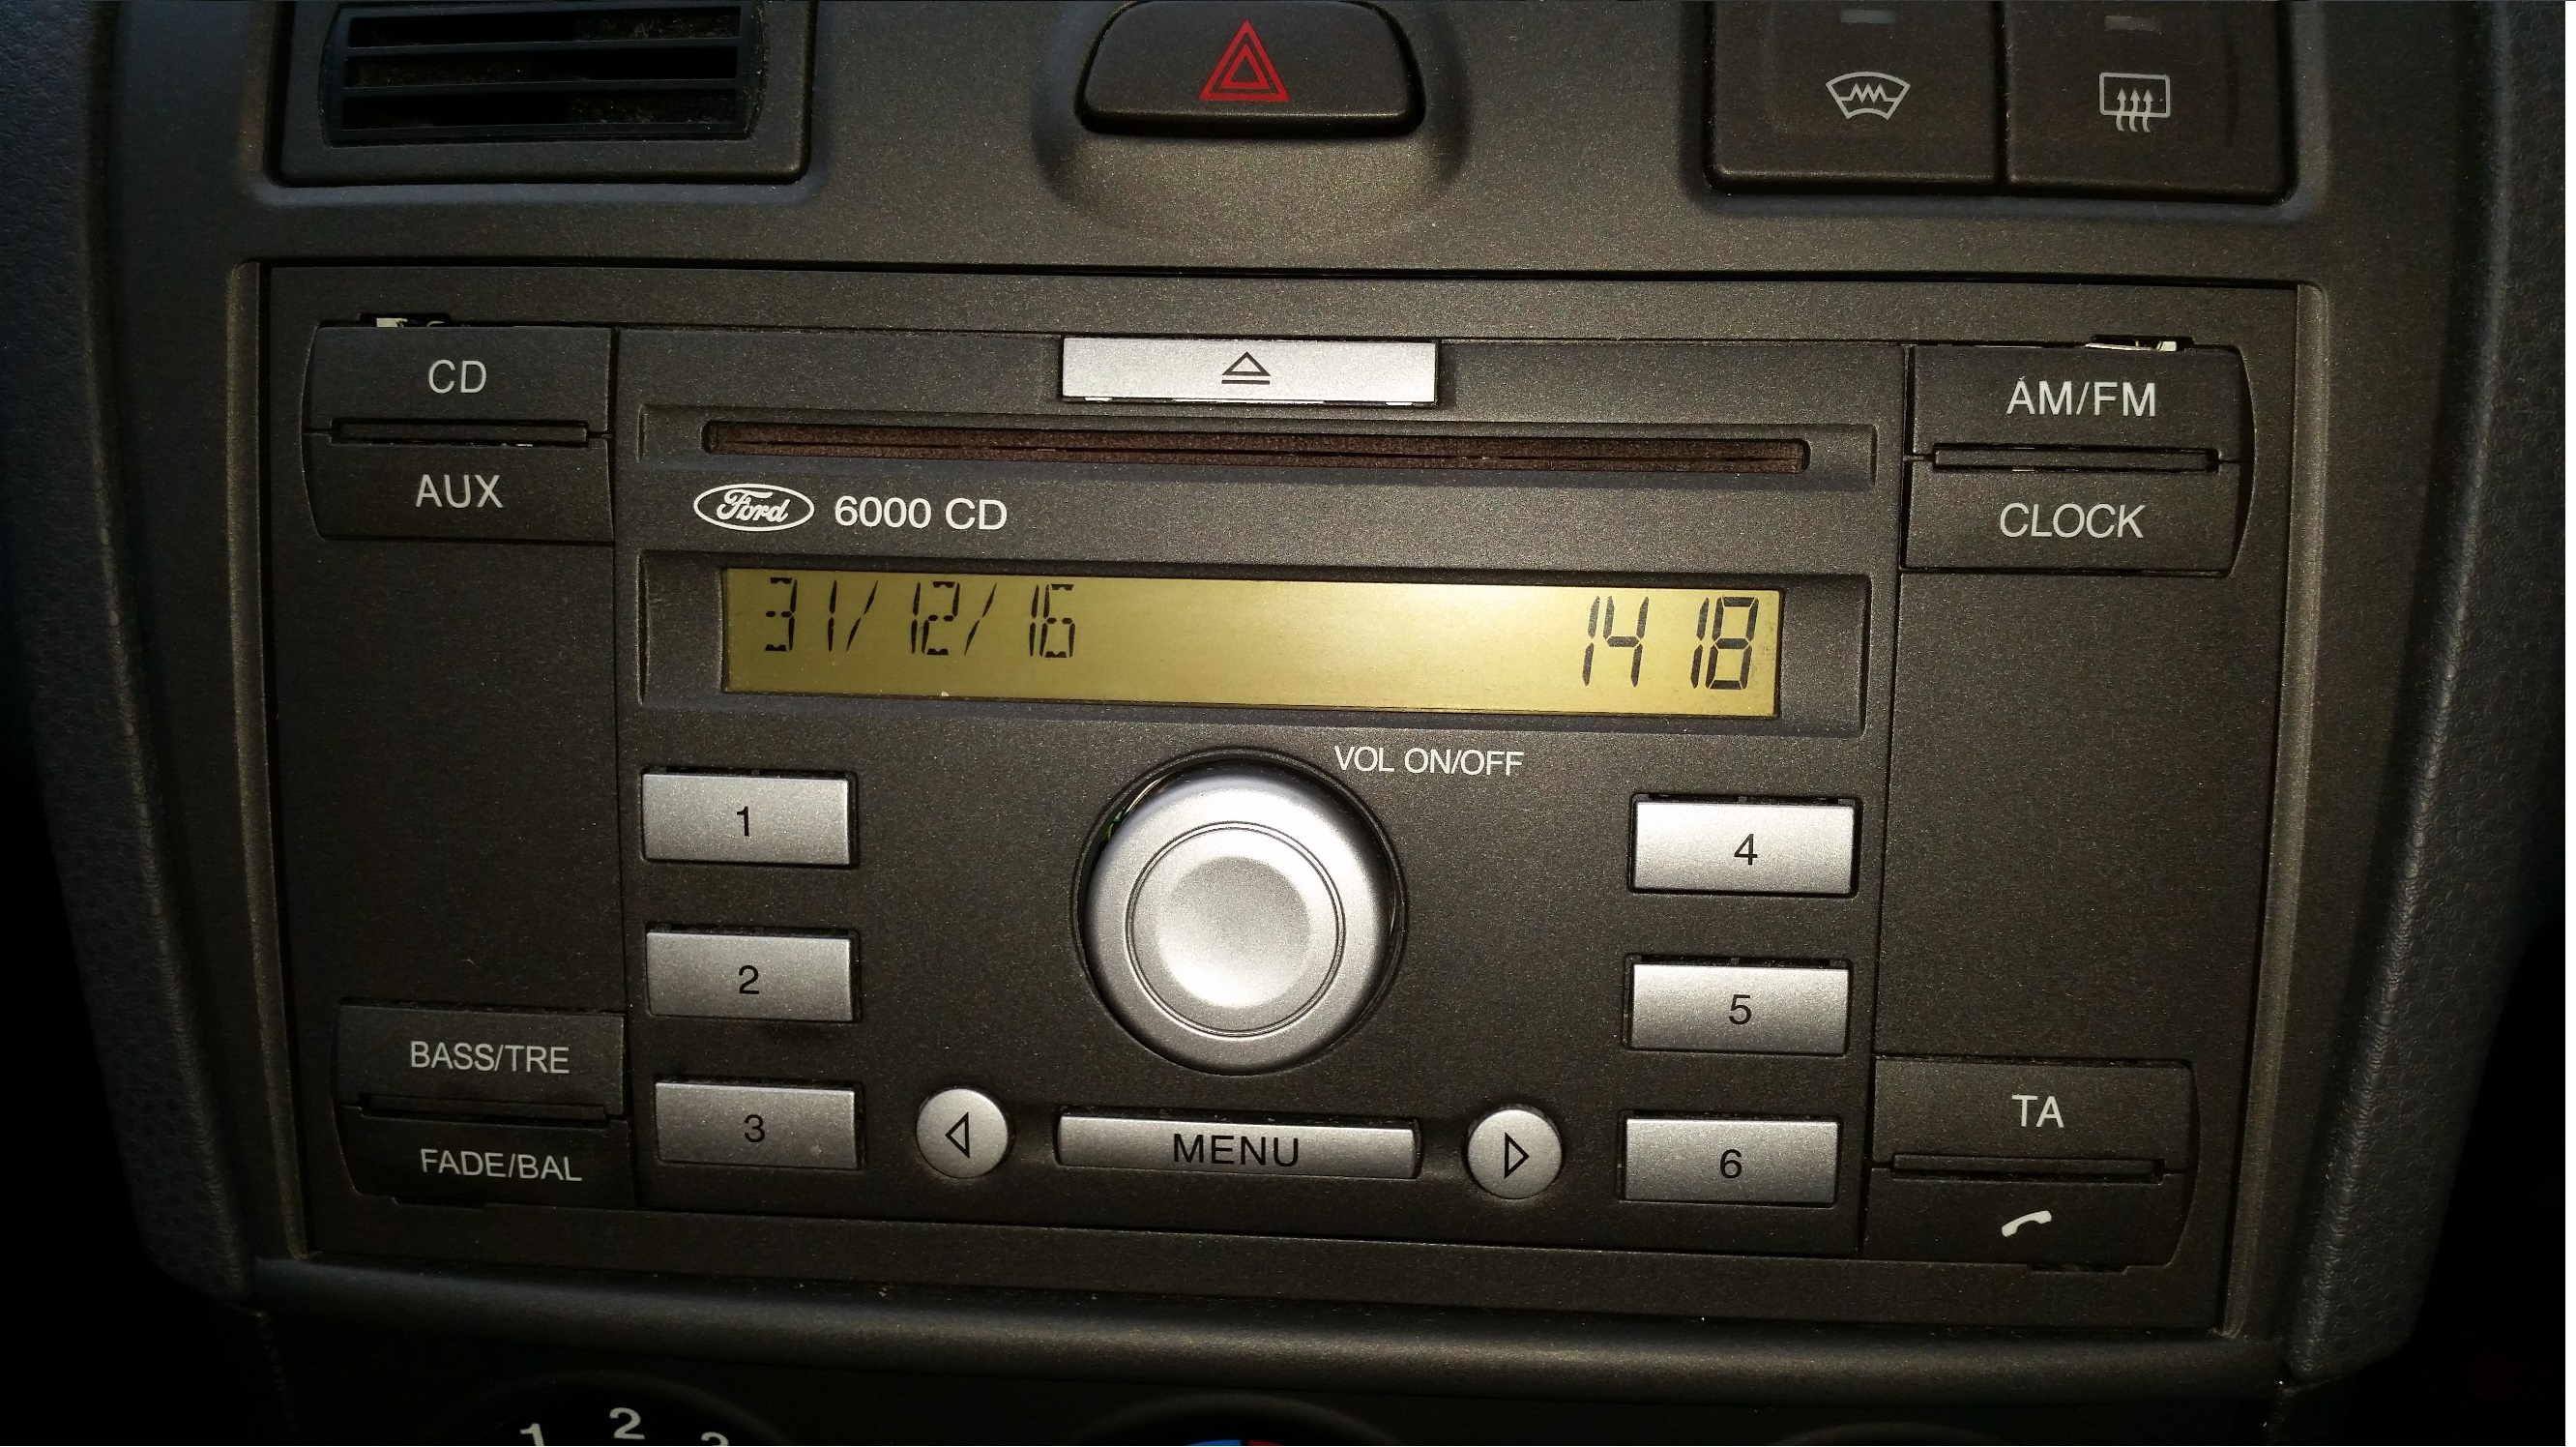 Radio in Ford Fiesta MK5 6000CD - fitting aux - Audio & Electronics - Ford  Owners Club - Ford Forums